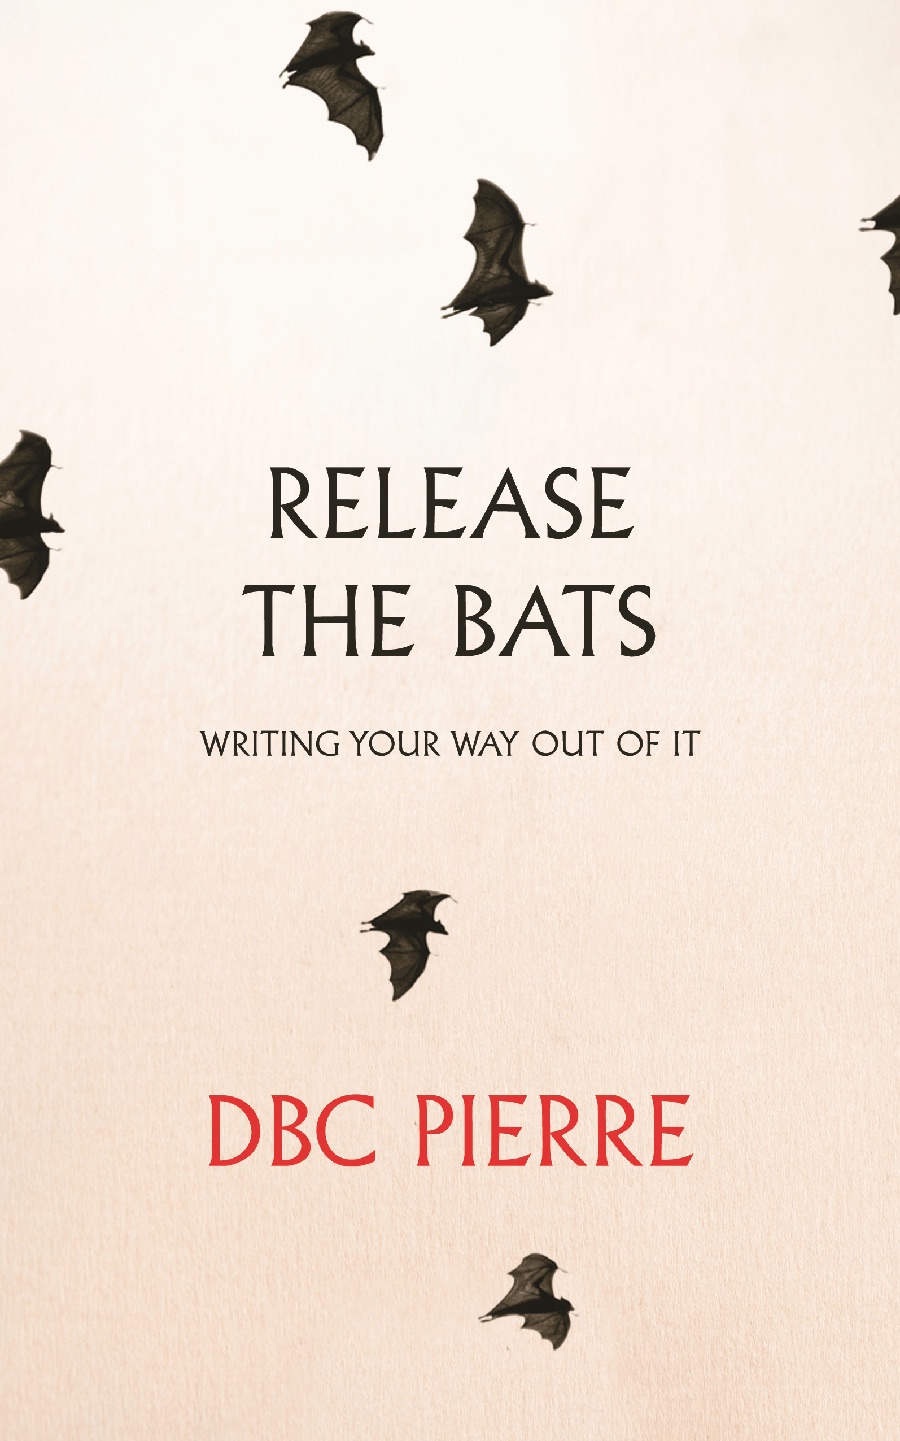 release_the_bats_DBCPIERRE_cover